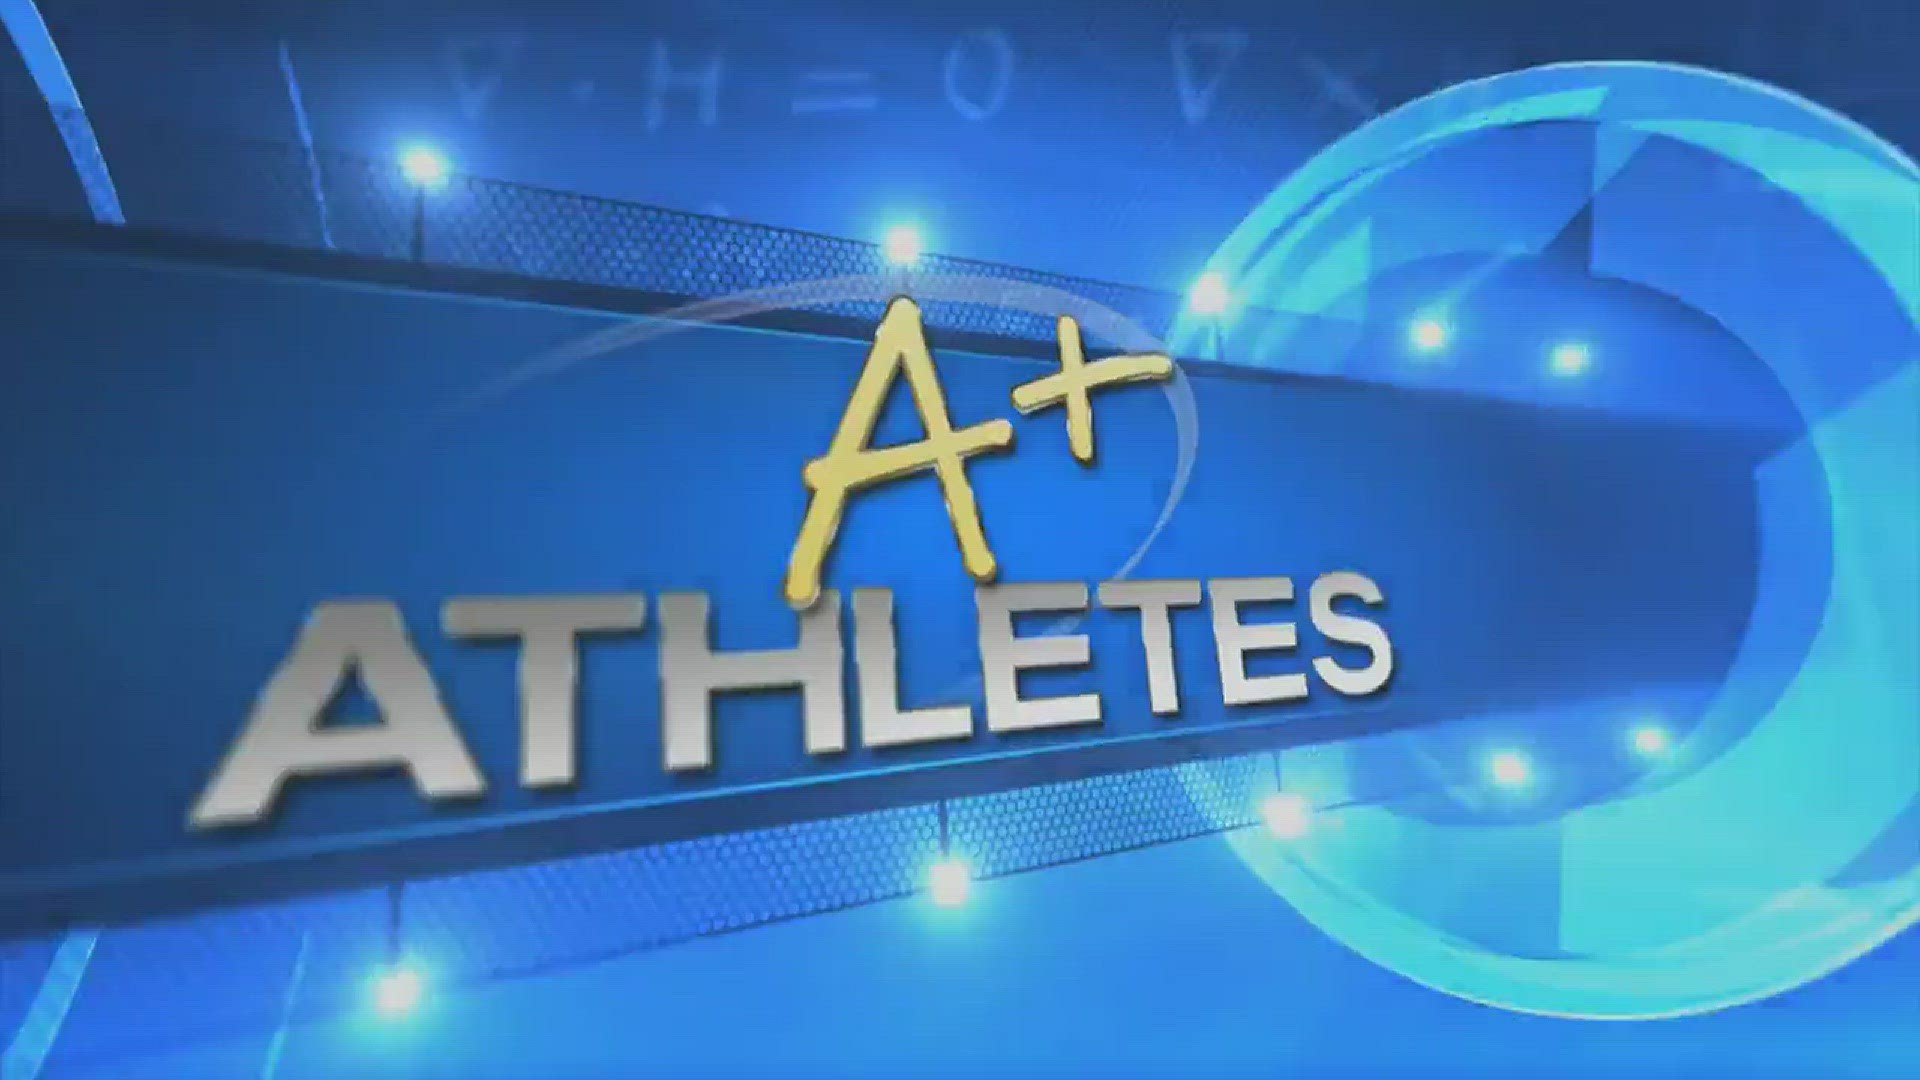 Brady Levron of South Lafourche is one of our A+ Athletes of the year.